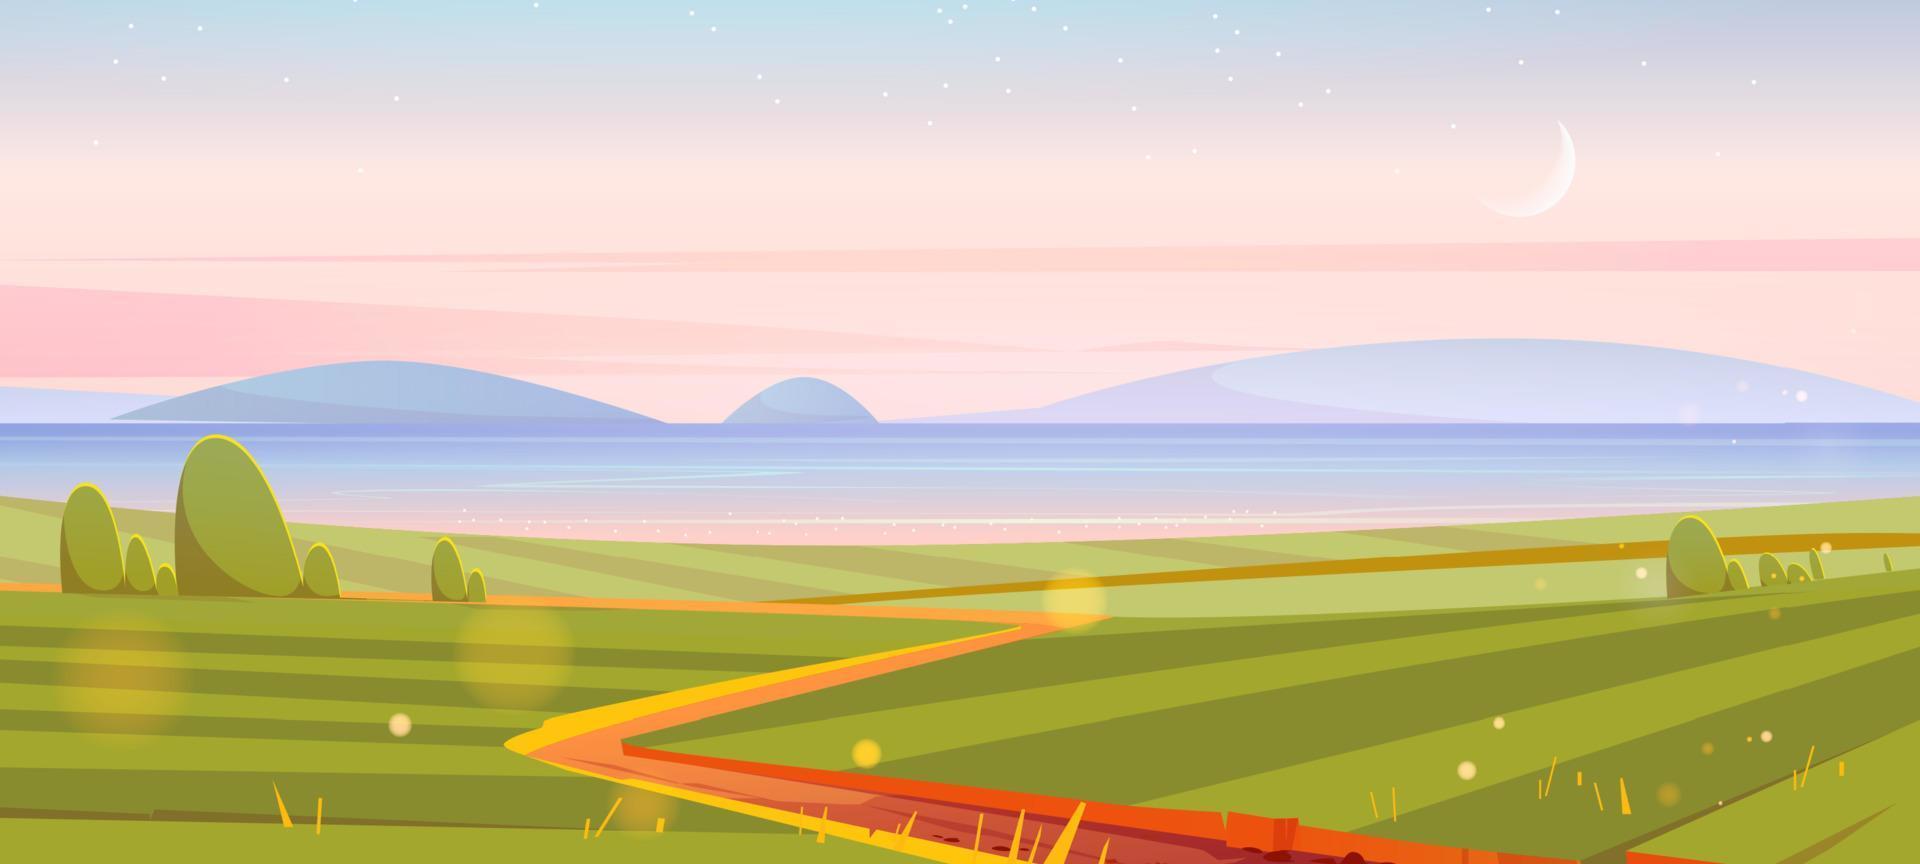 River, green fields, hills and moon in sky vector